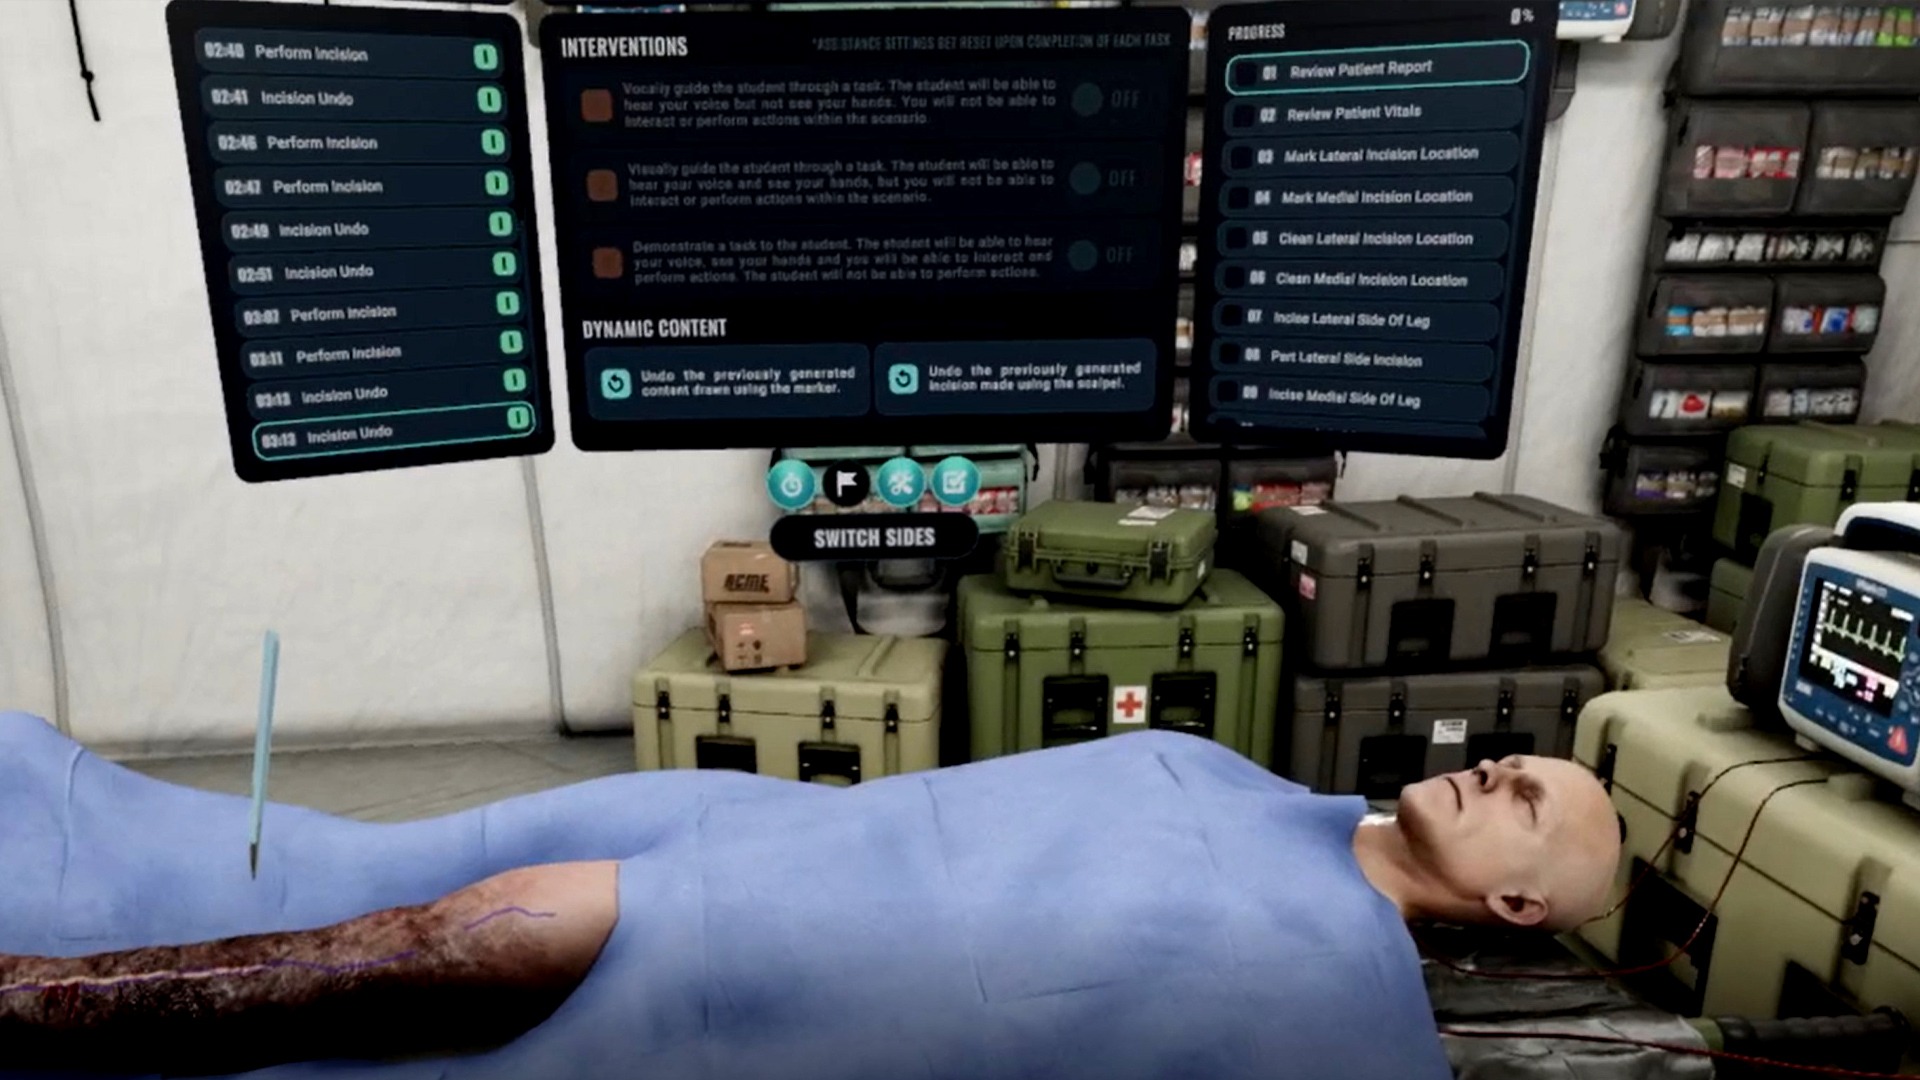 Advanced medical simulation for burn care with advanced haptic integration.